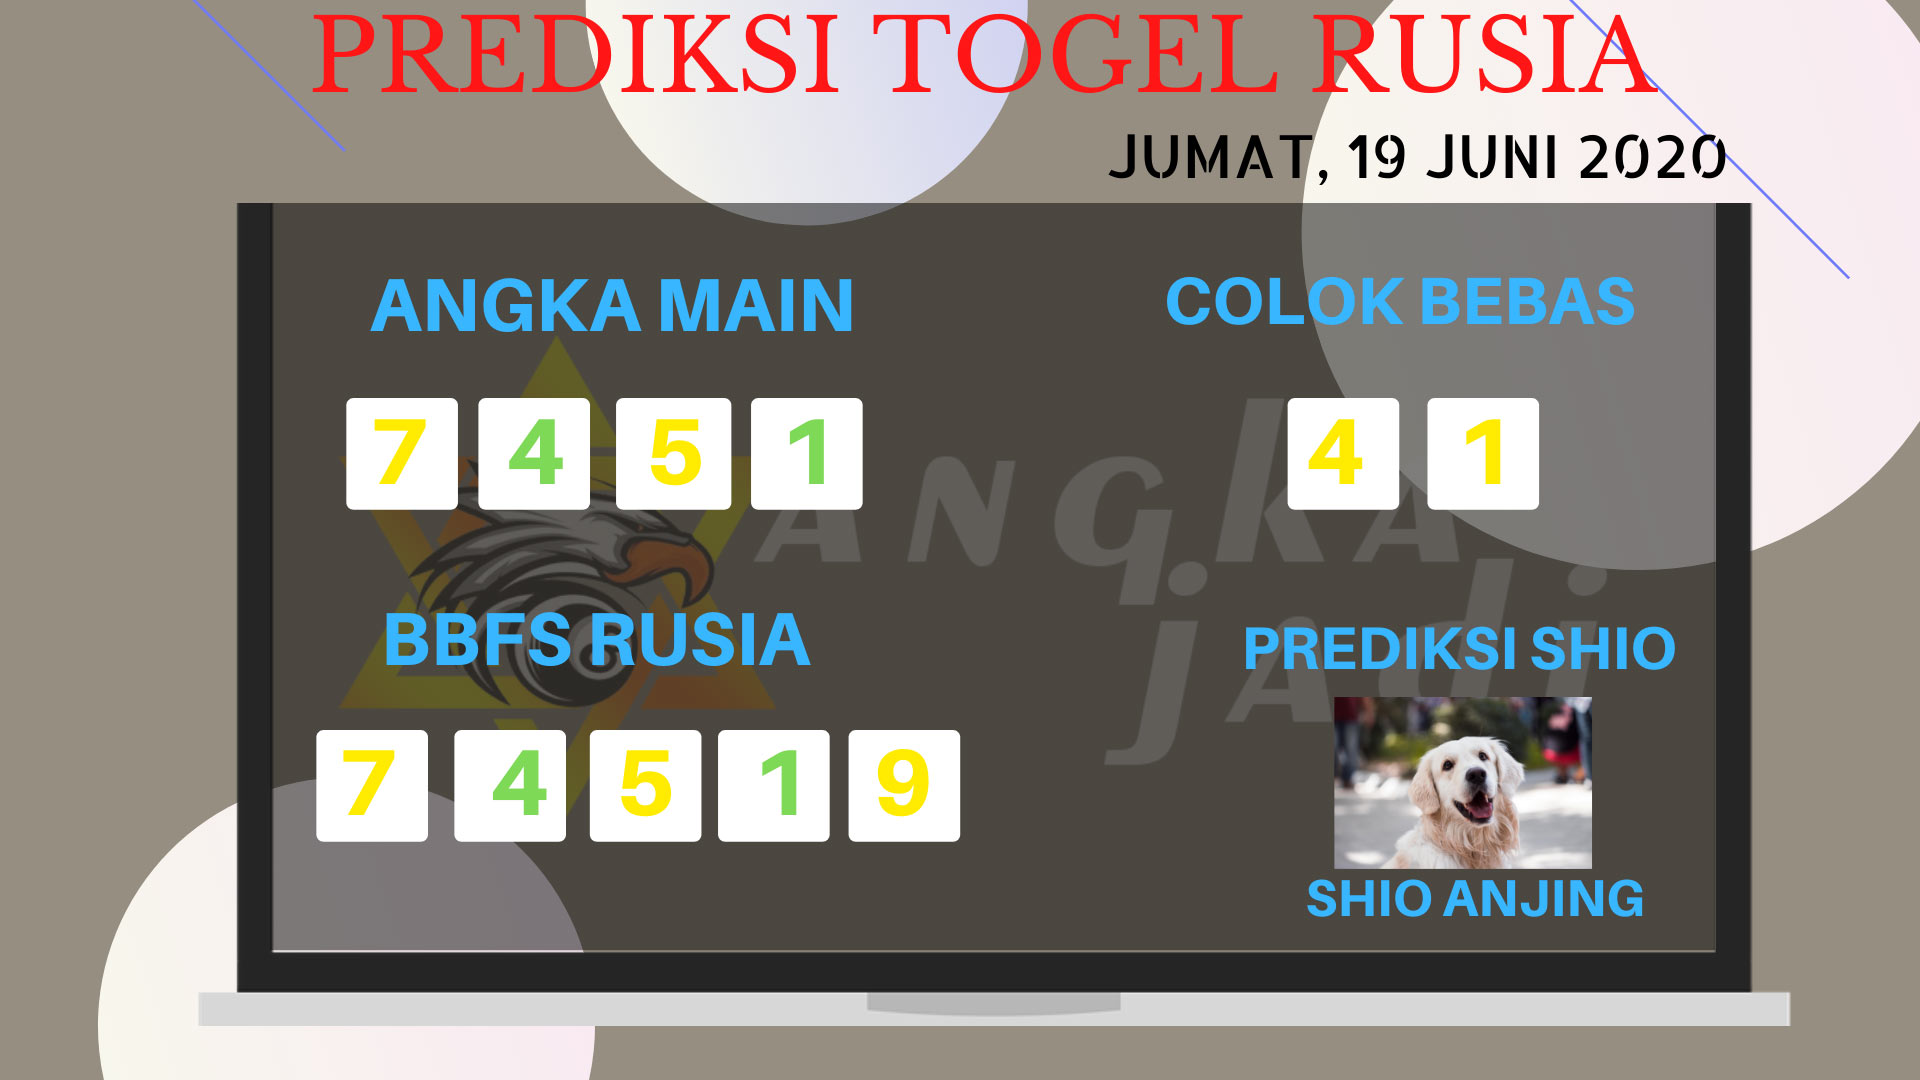 Paito Togel Russia